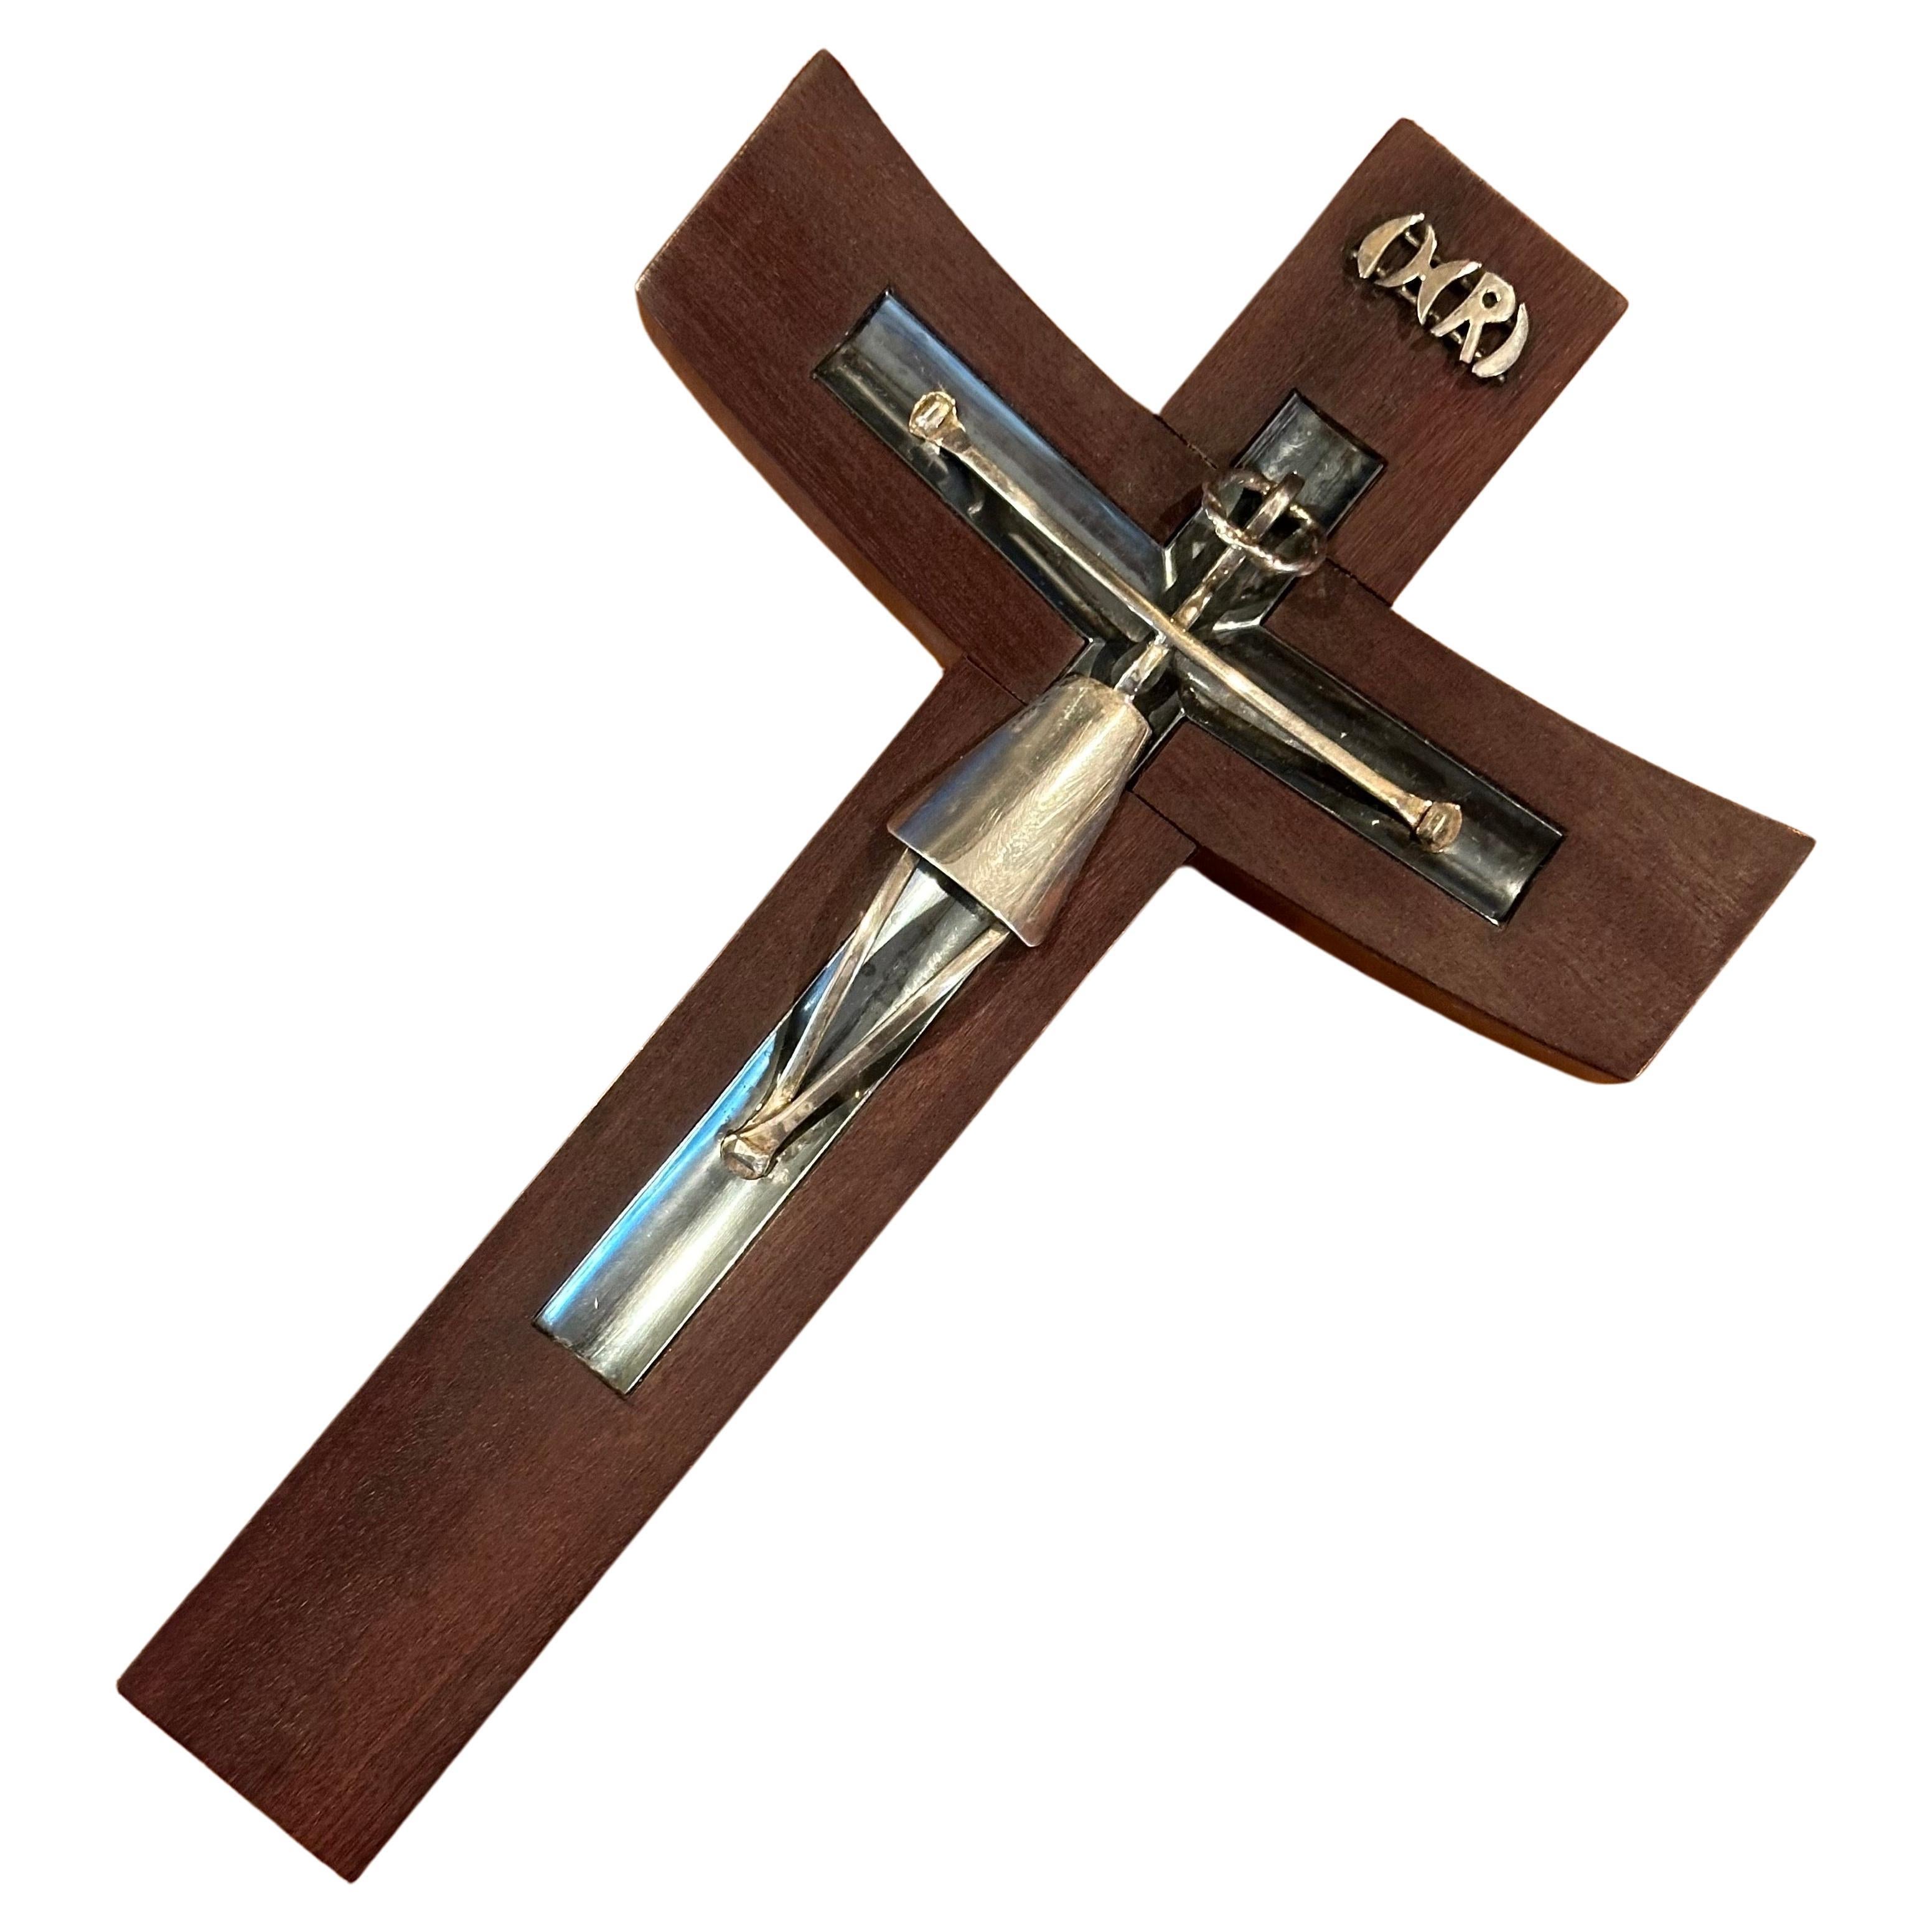 Modernist rosewood and sterling silver crucifix / cross by Taxco of Mexico, circa 1970s. The piece measures 6.25